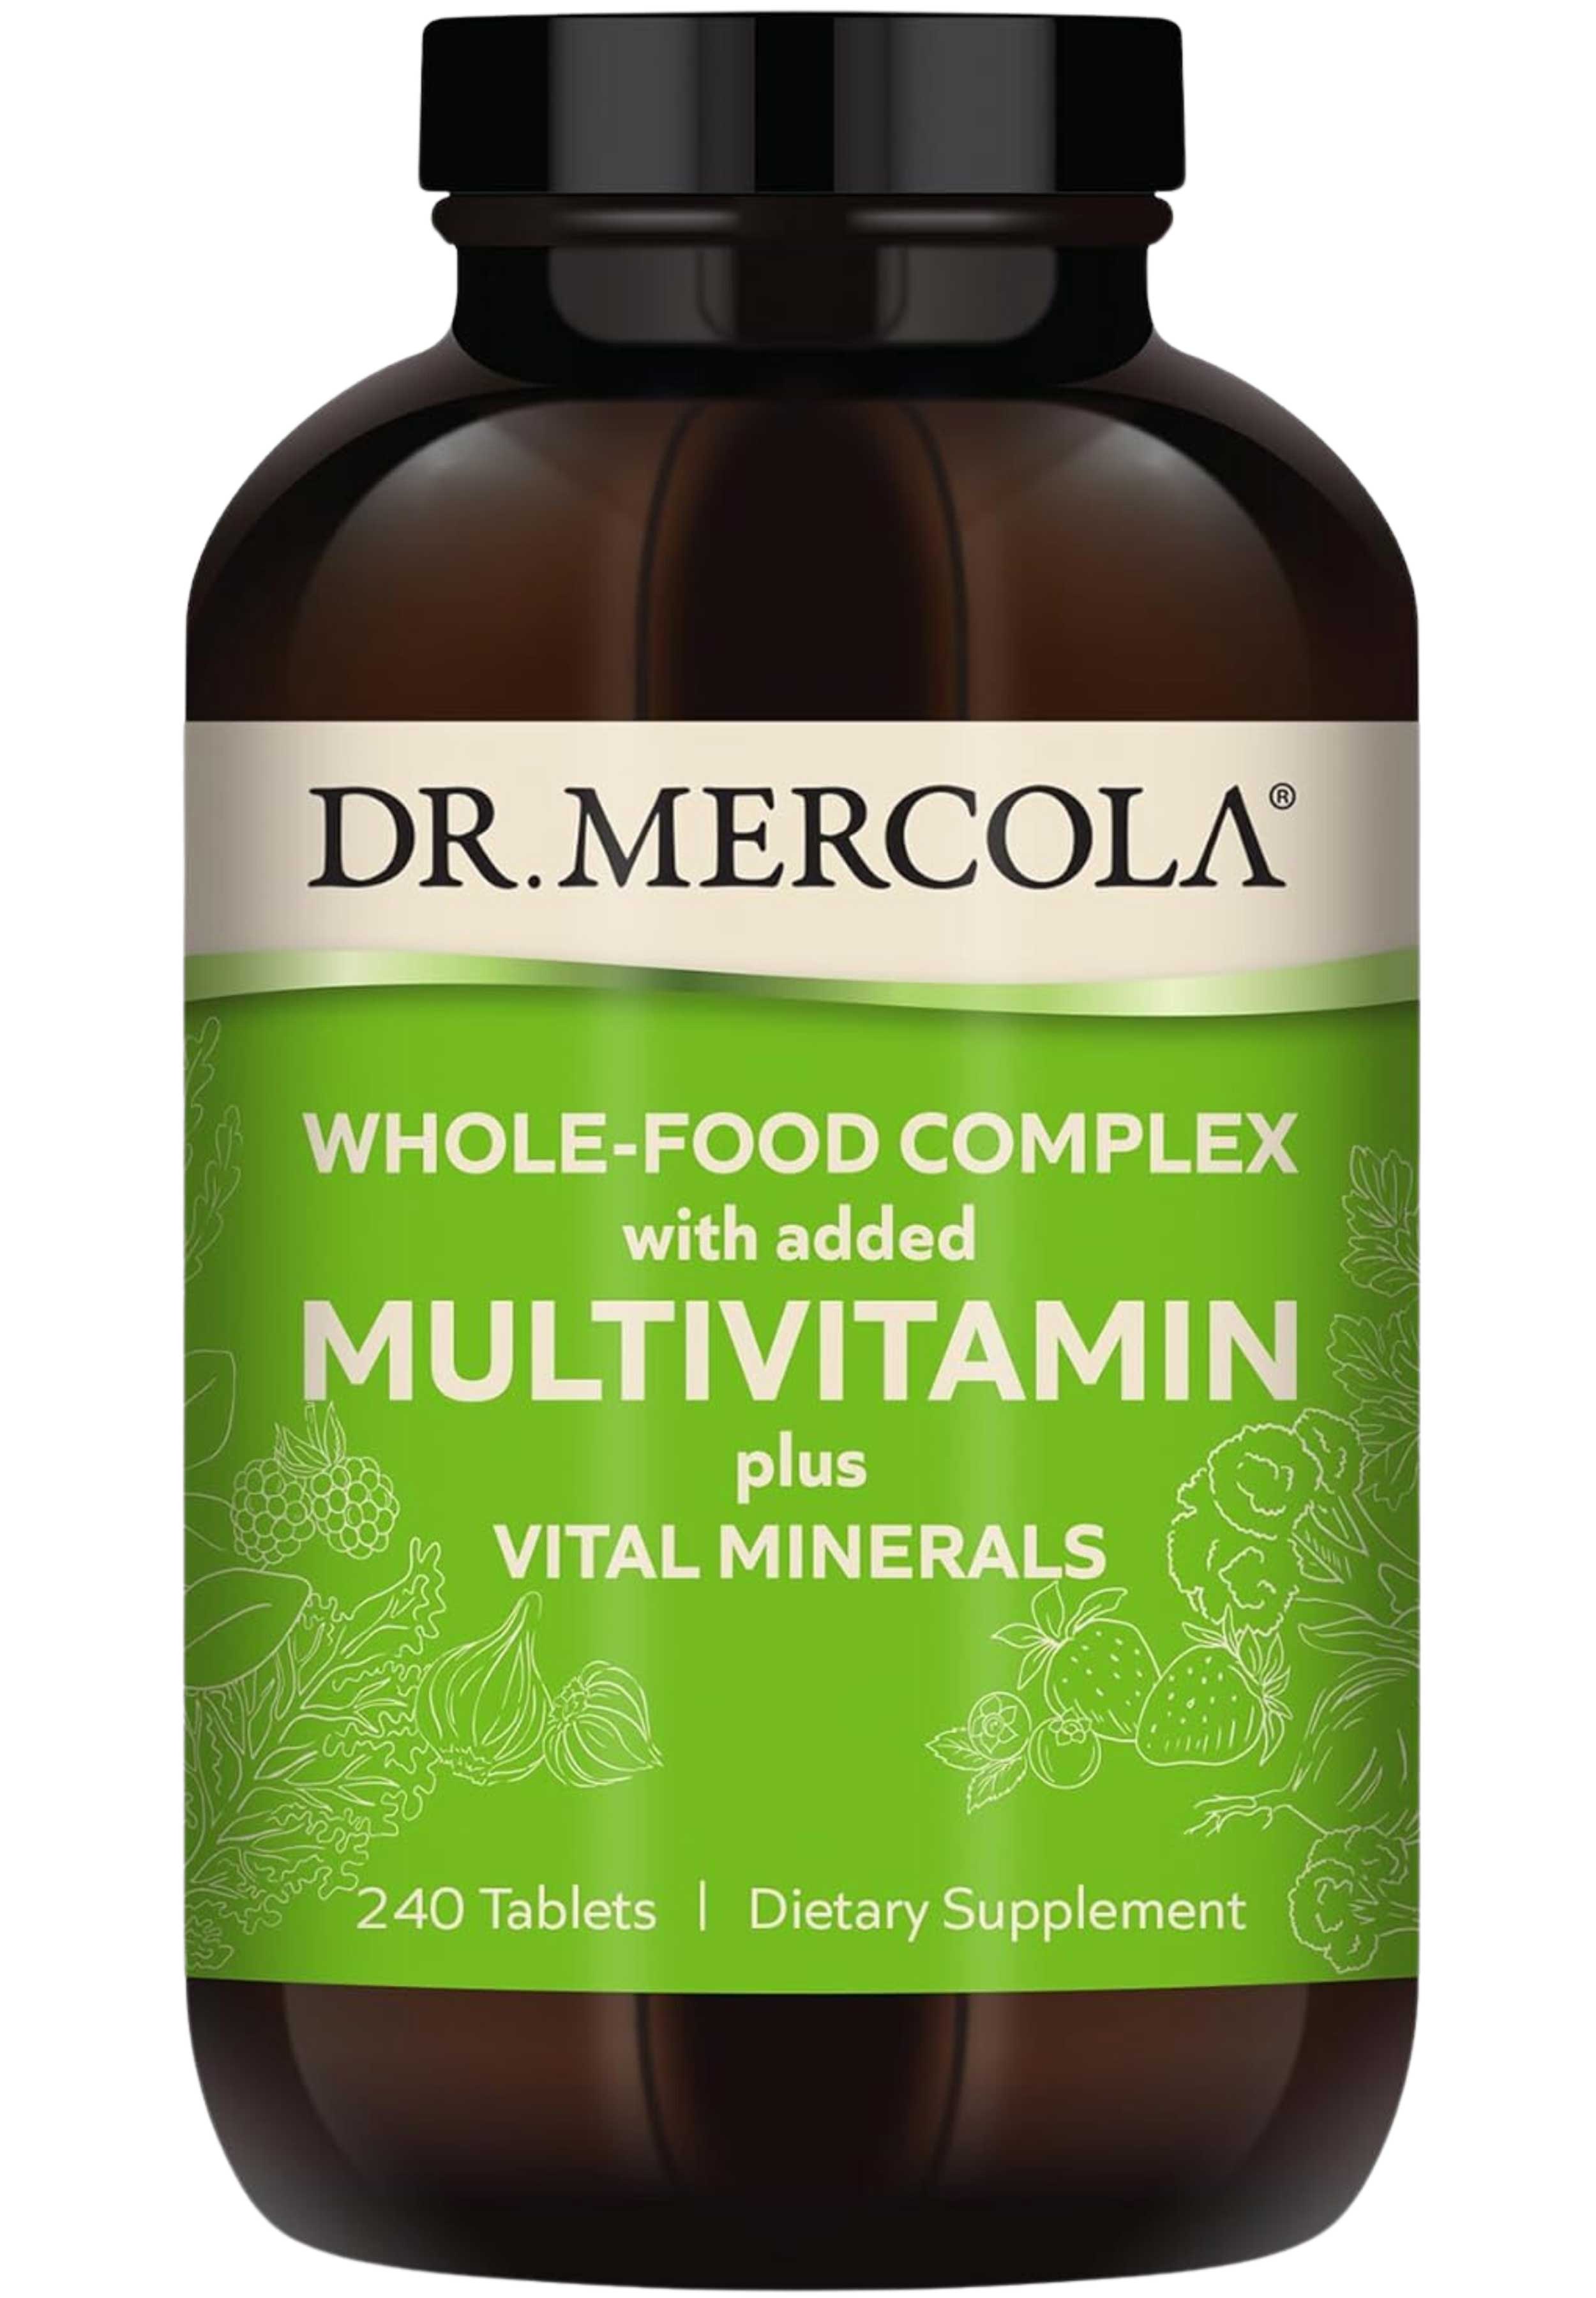 Dr. Mercola Whole Food Complex (Formerly Whole Food Multivitamin Plus)